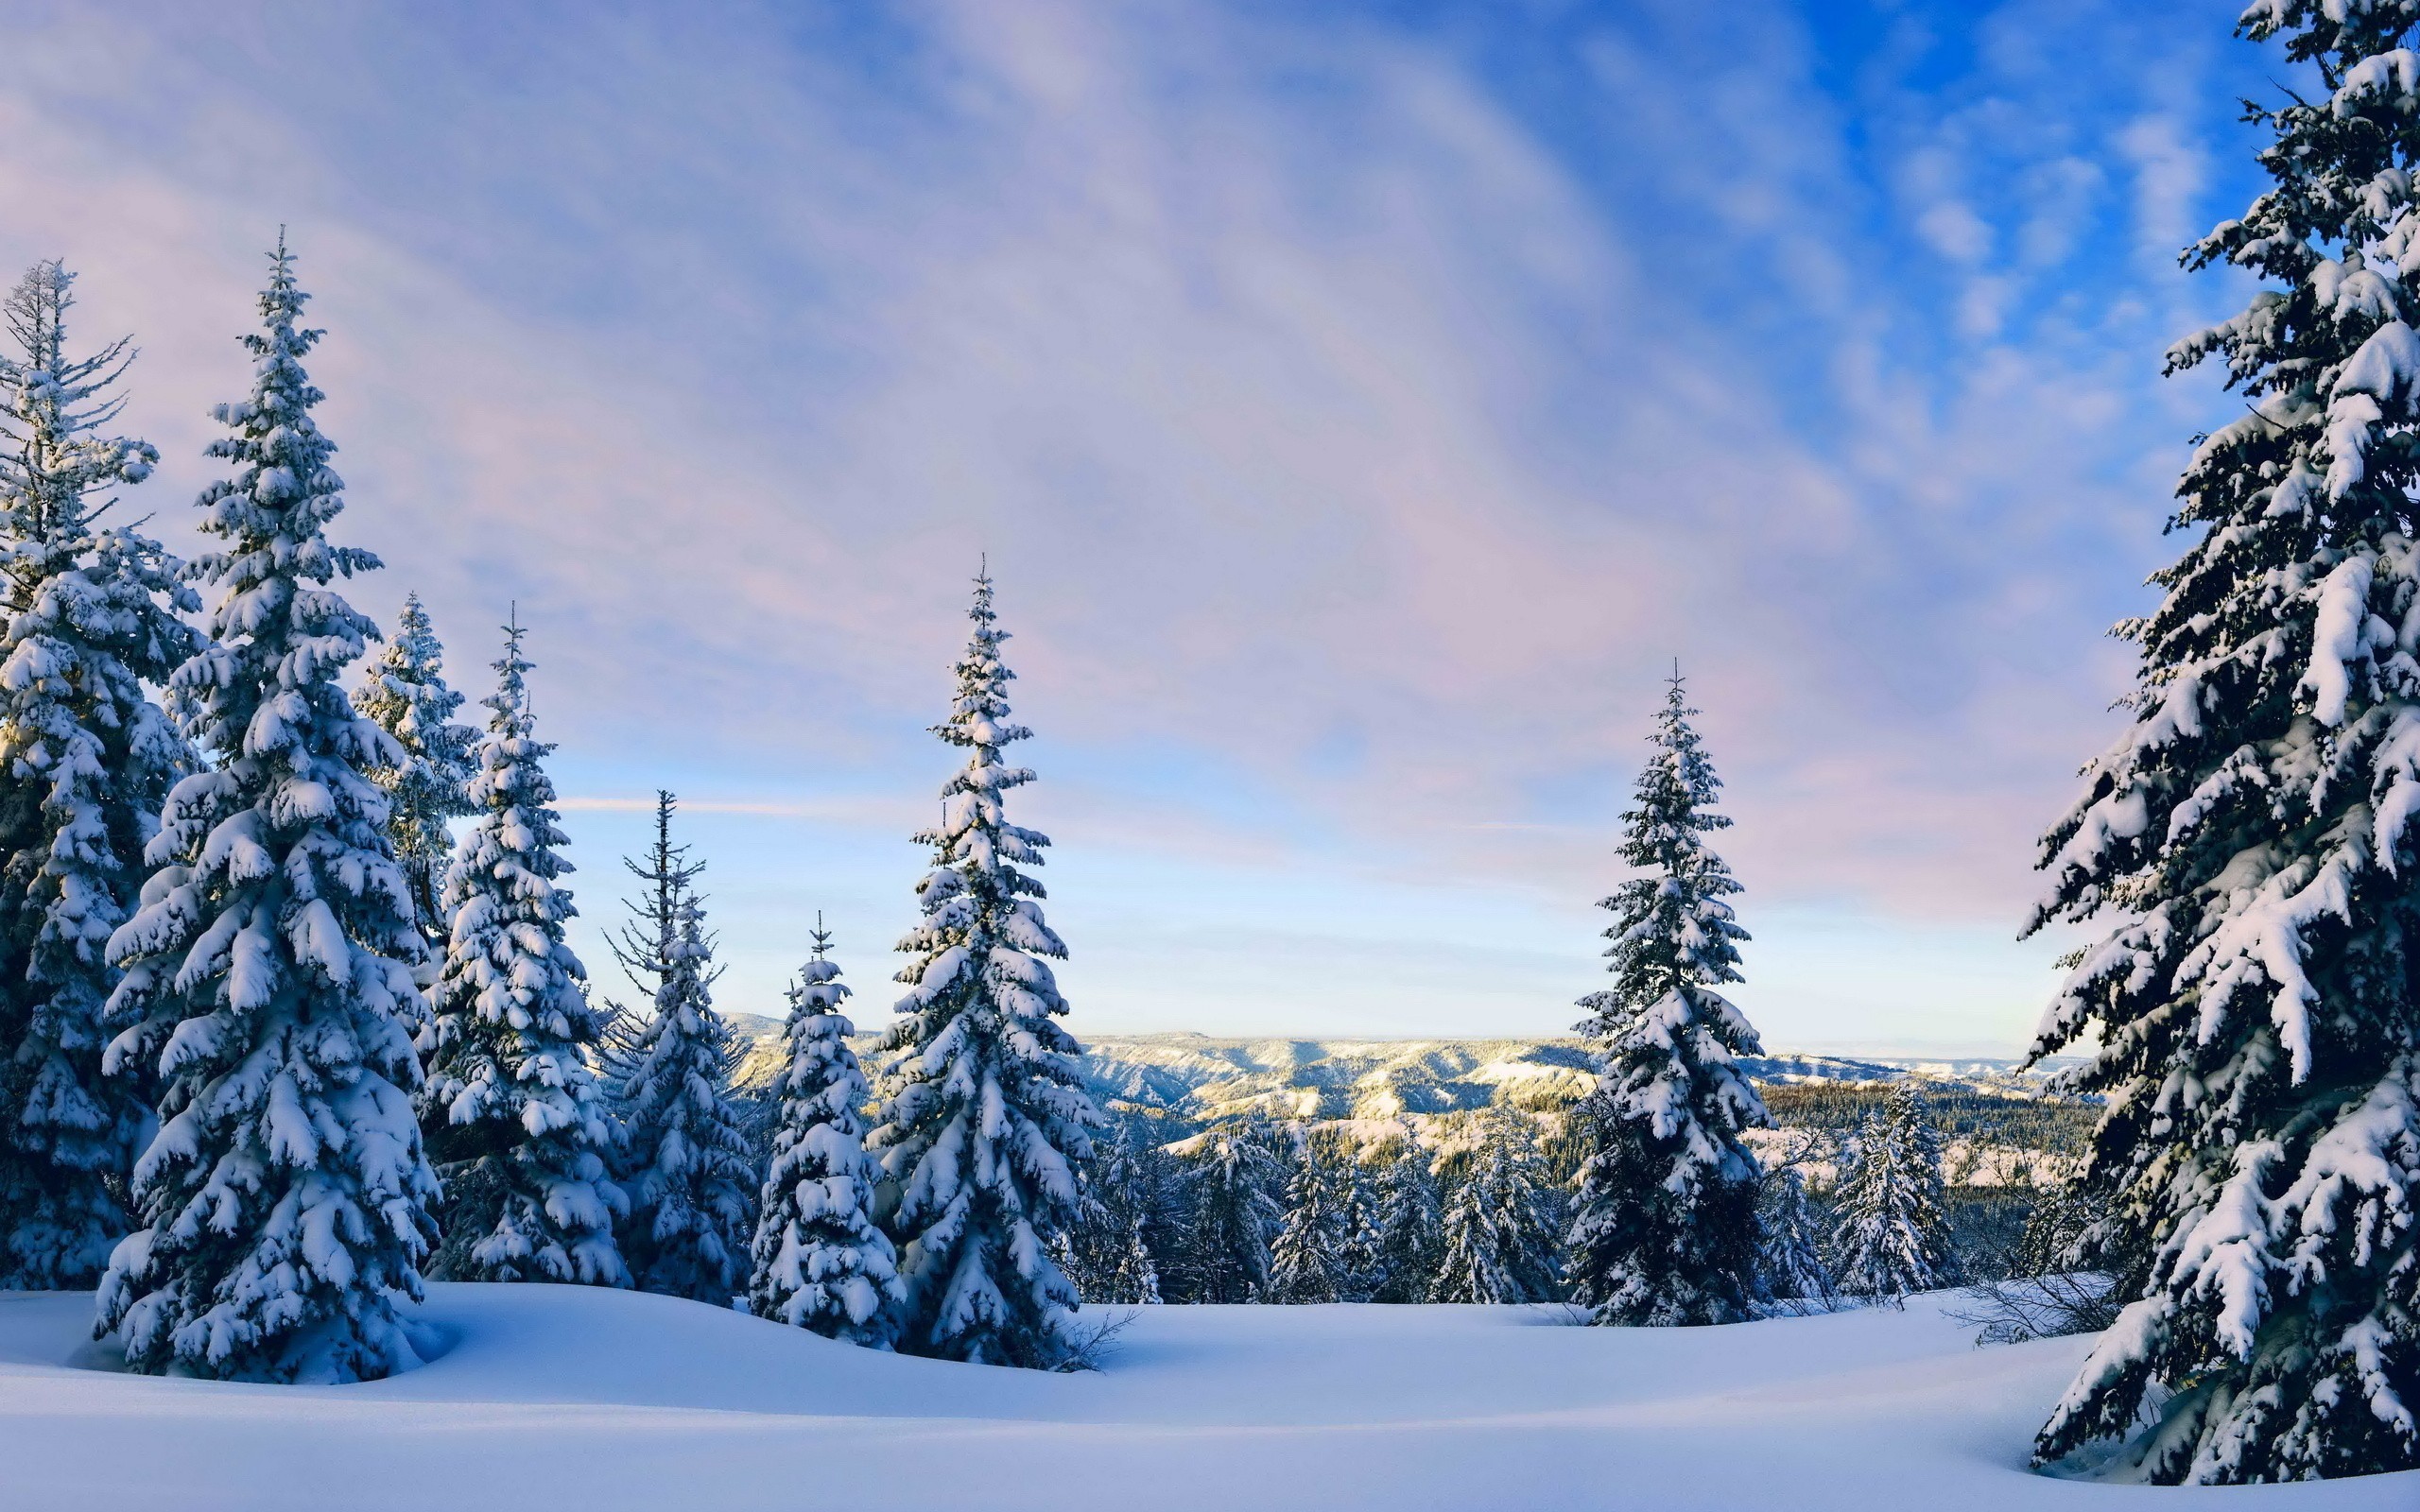 General 2560x1600 nature landscape snow trees forest winter